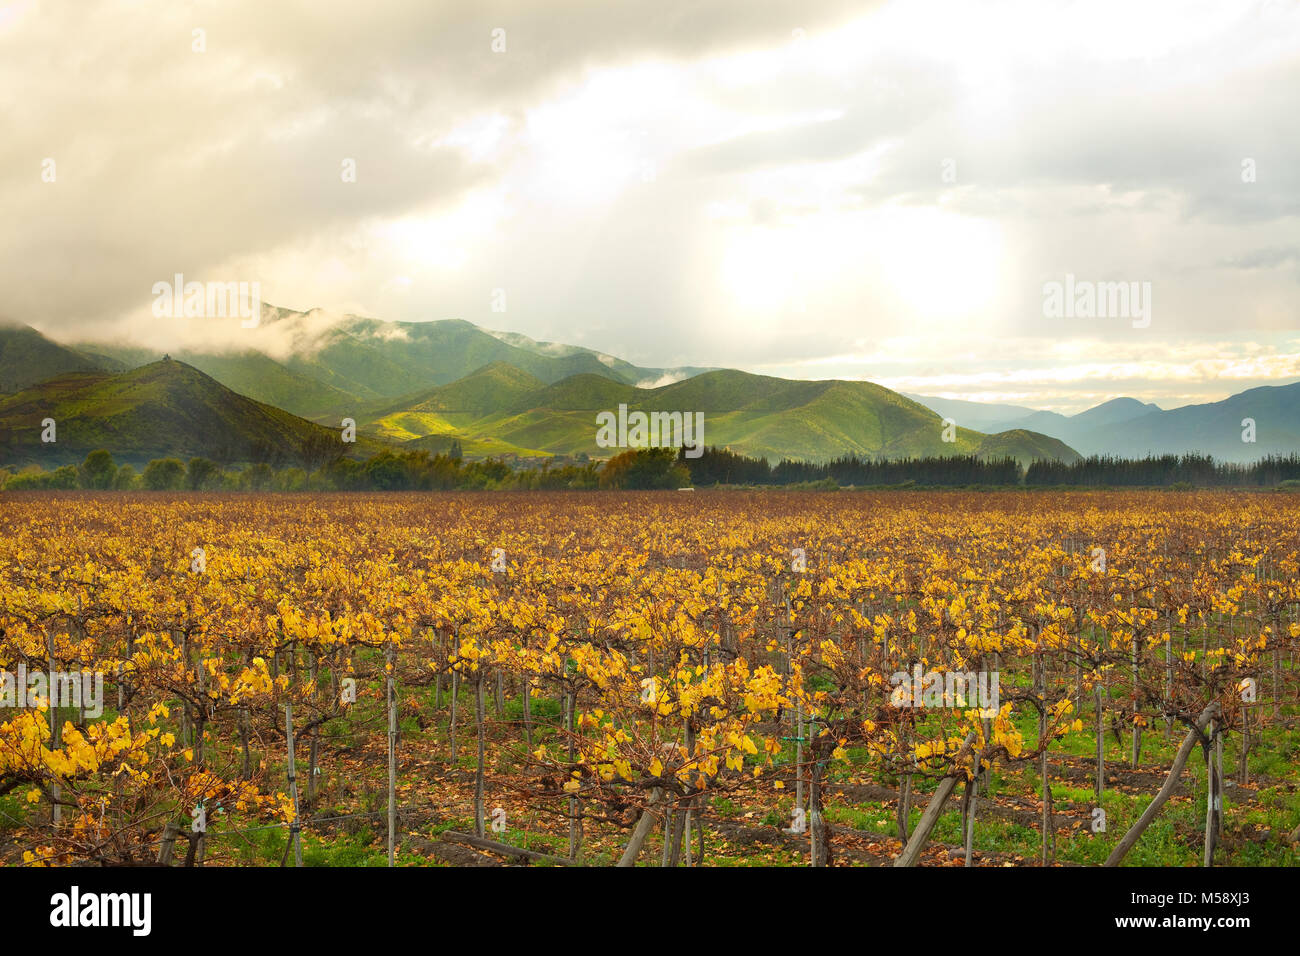 Grape crops at Elqui Valley, Coquimbo Region, Chile Stock Photo